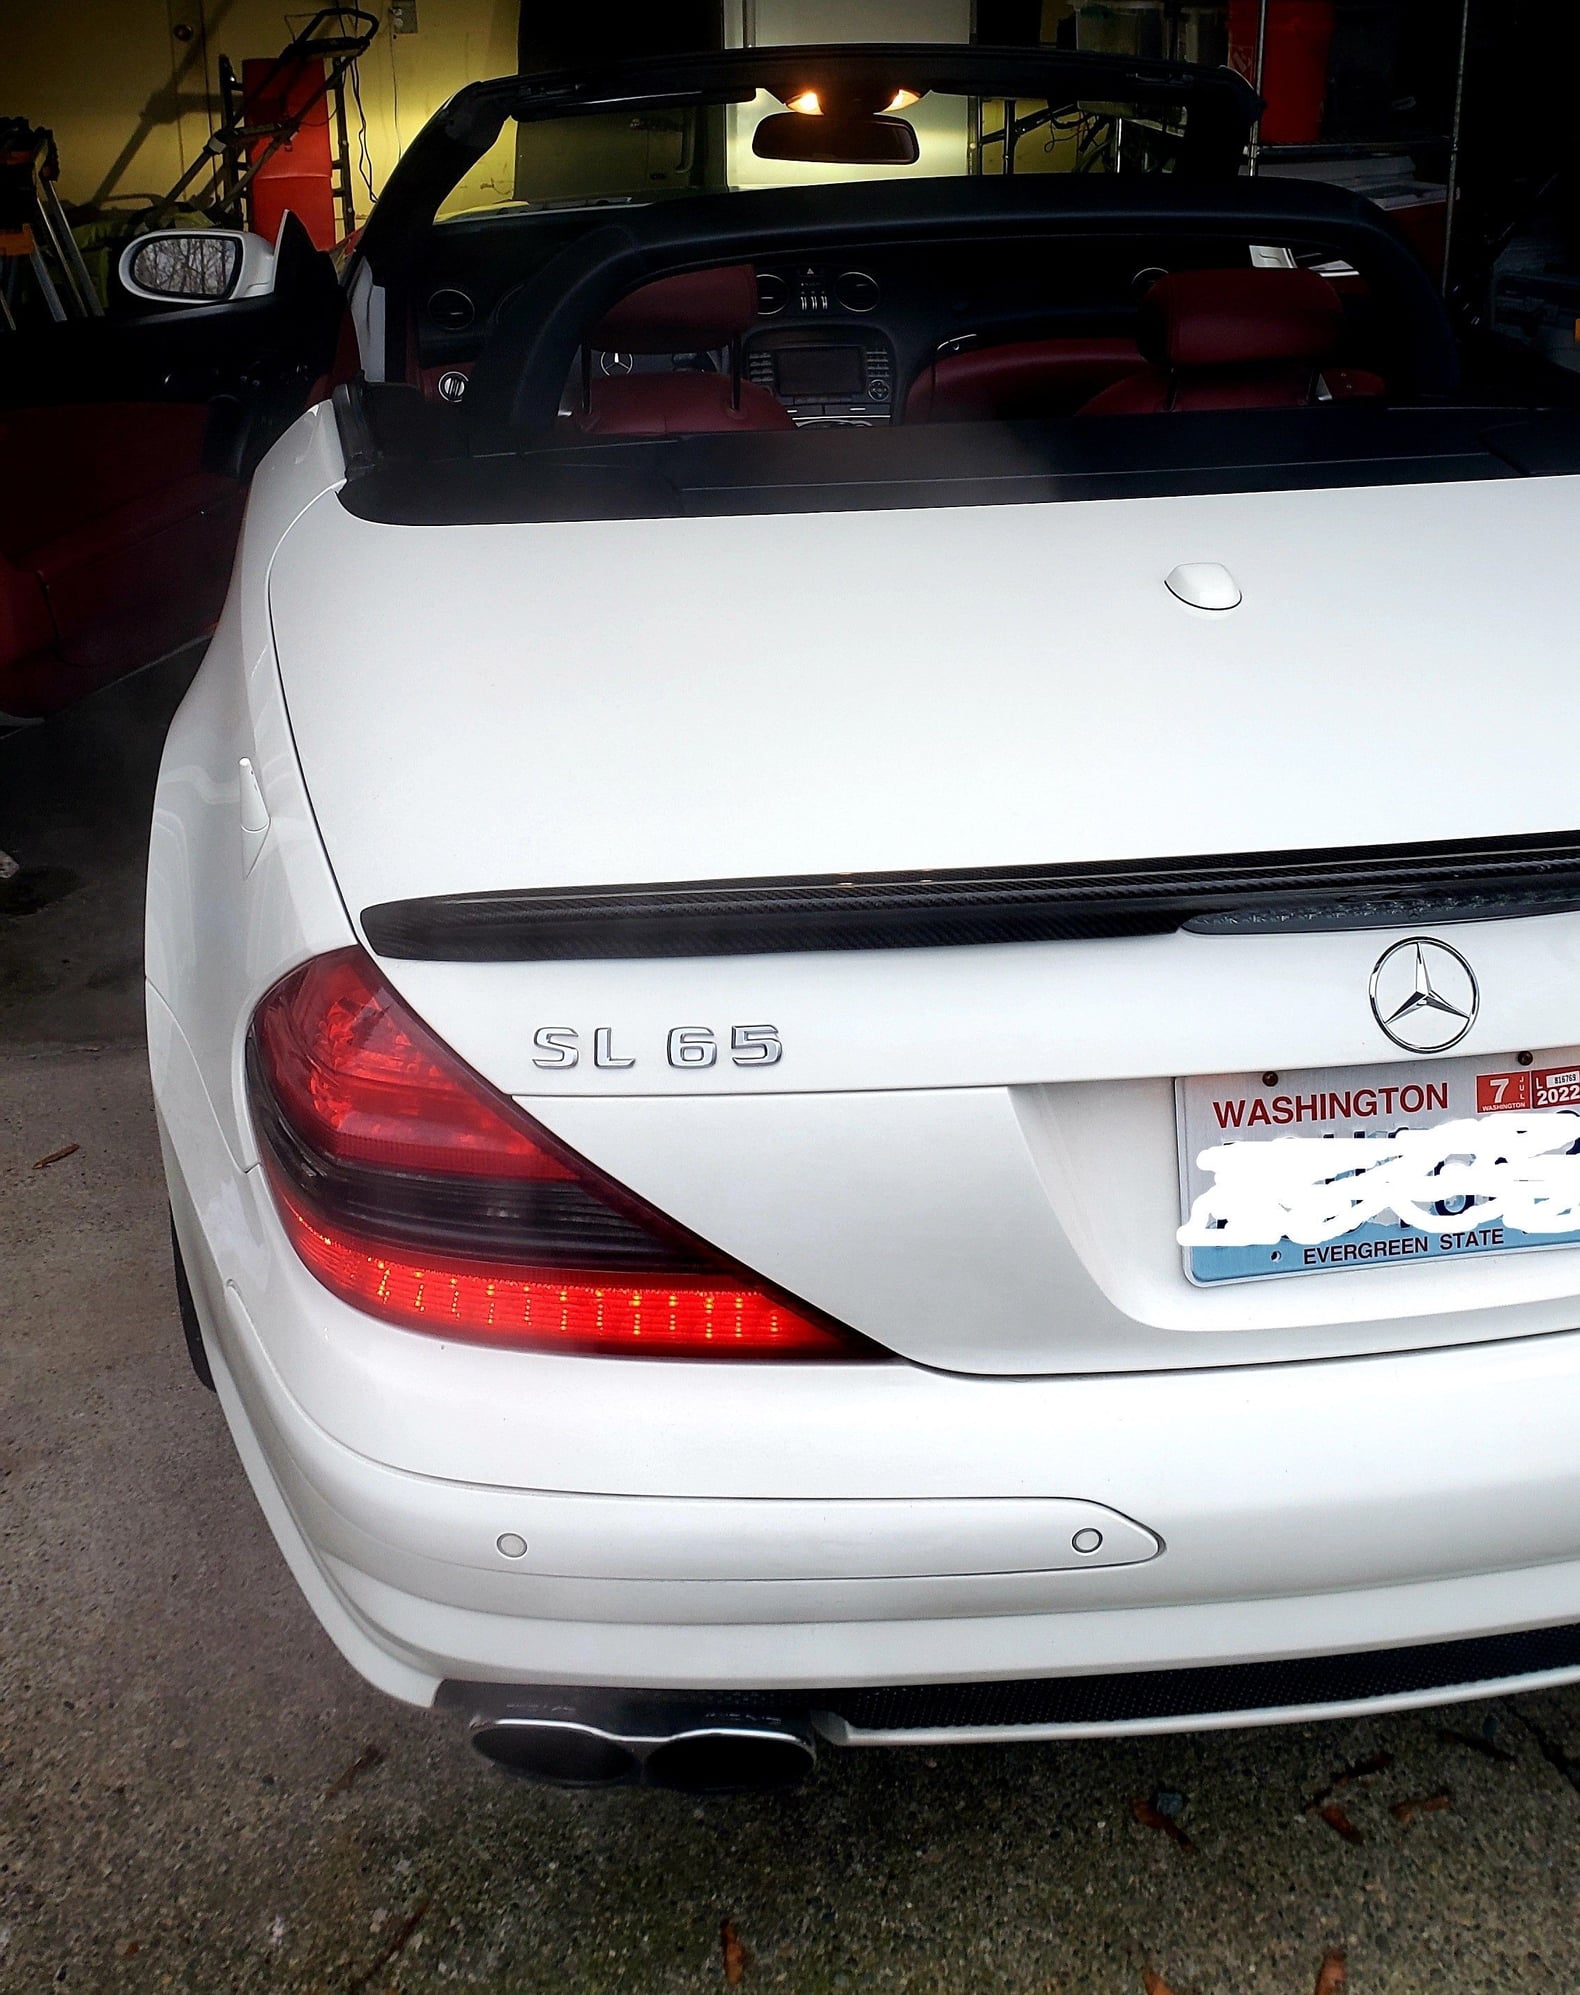 2007 Mercedes-Benz SL65 AMG - 2007 SL65 AMG White on Burry - Used - VIN WDBSK79F87F125787 - 65,000 Miles - 12 cyl - 2WD - Automatic - Coupe - White - Seattle, WA 98092, United States